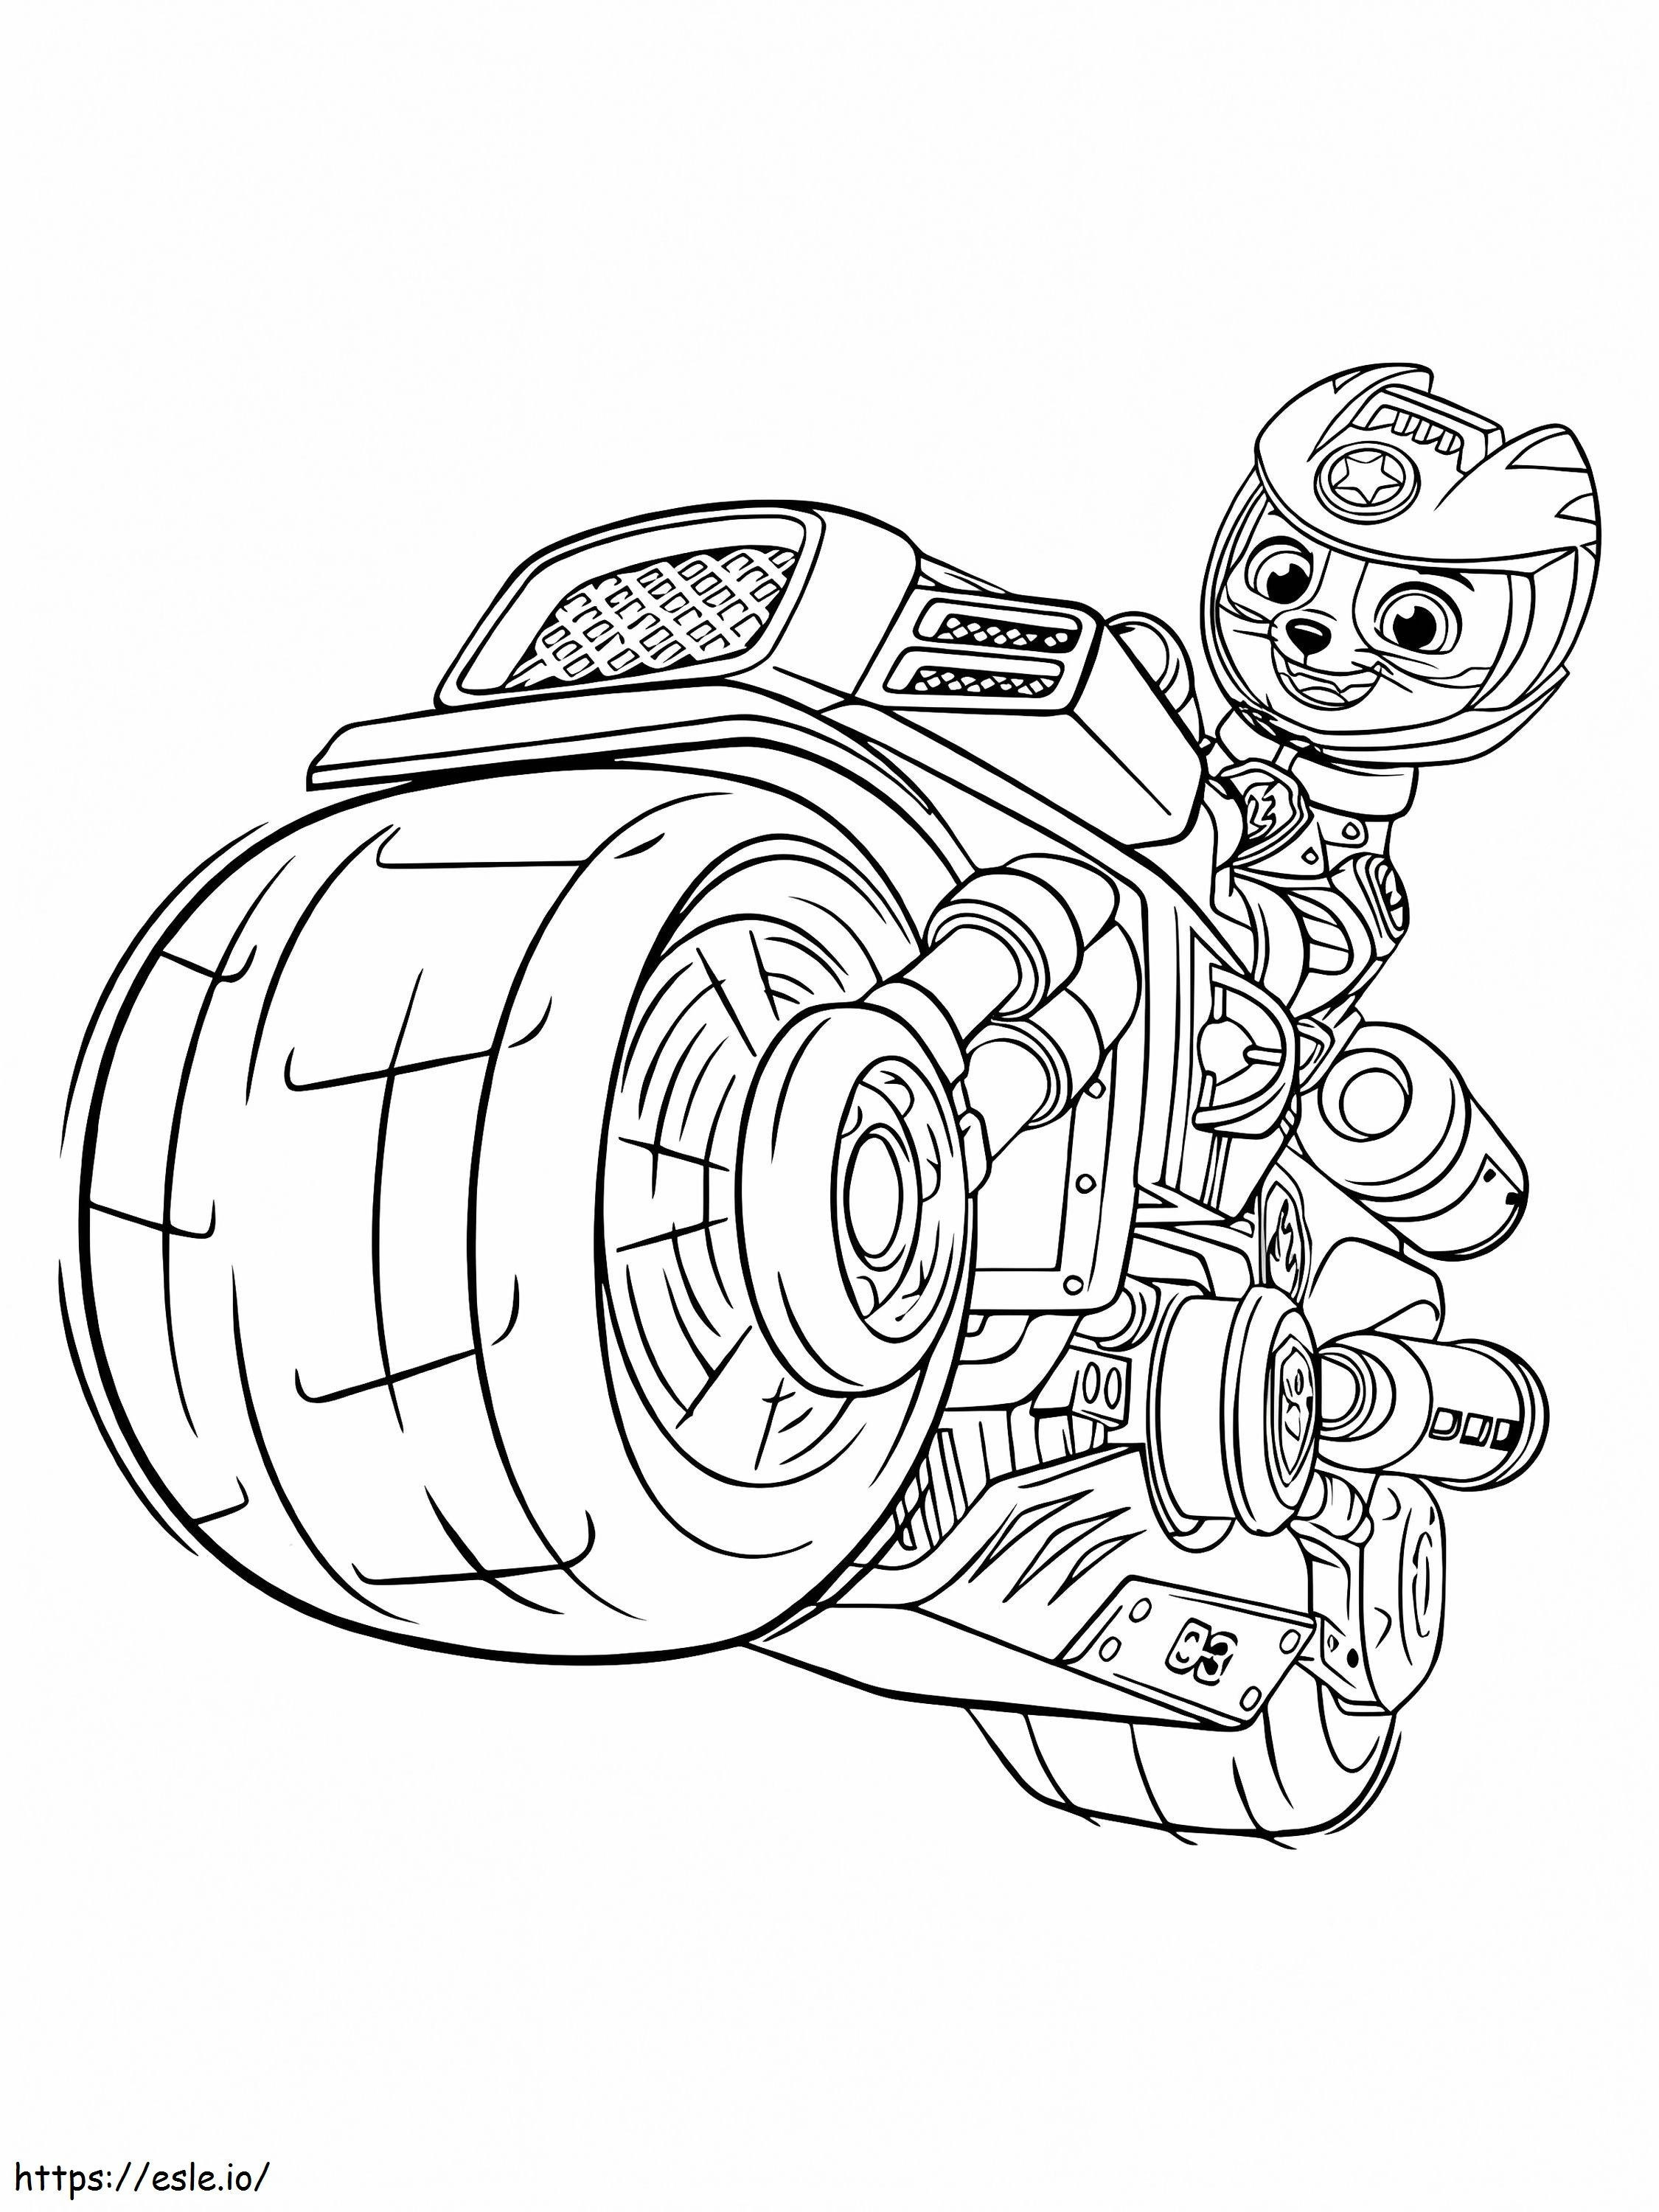 Motor Bike And Wild Cat coloring page